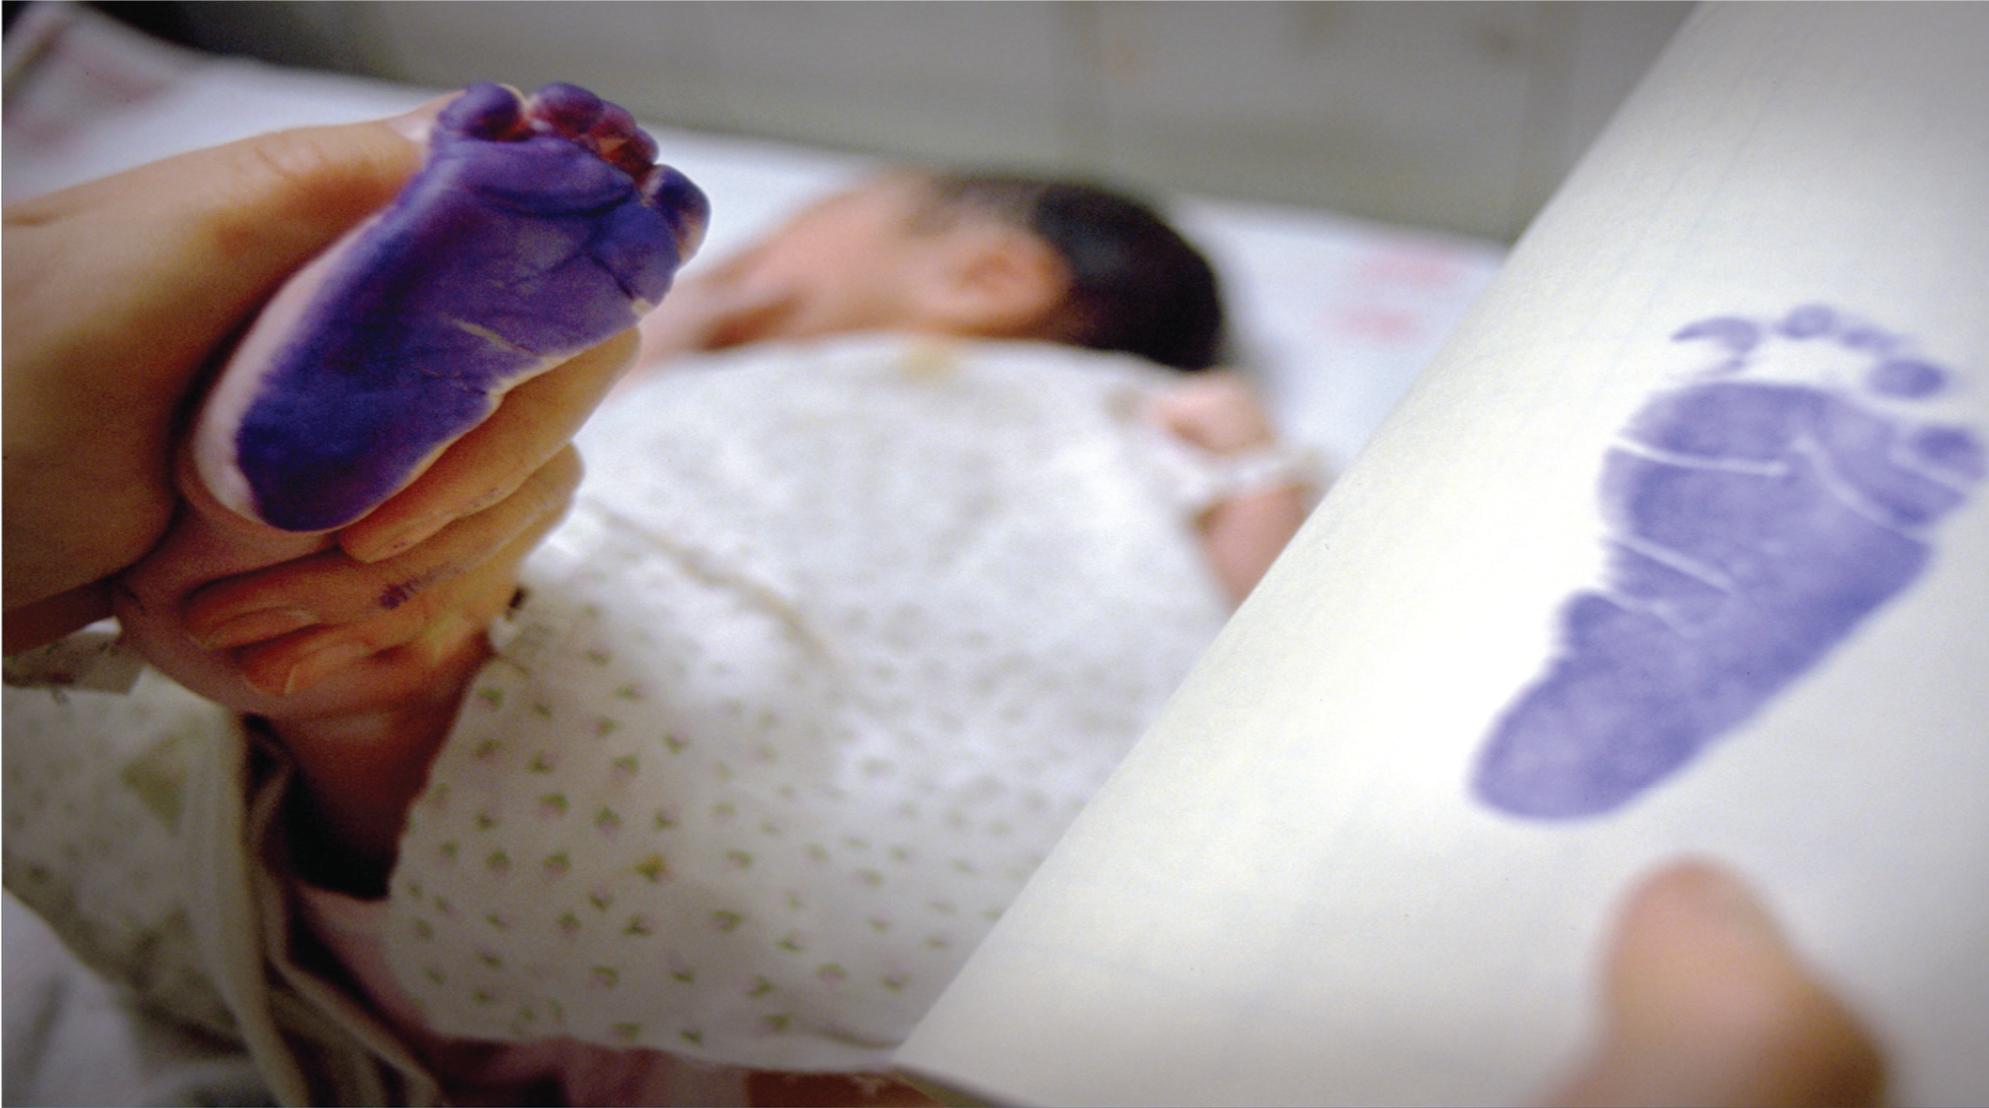 A picture of a newborns footprint being recorded. In foreground is the baby's foot with purple ink on and the footprint on a piece of paper, newborn is blurred in backfround